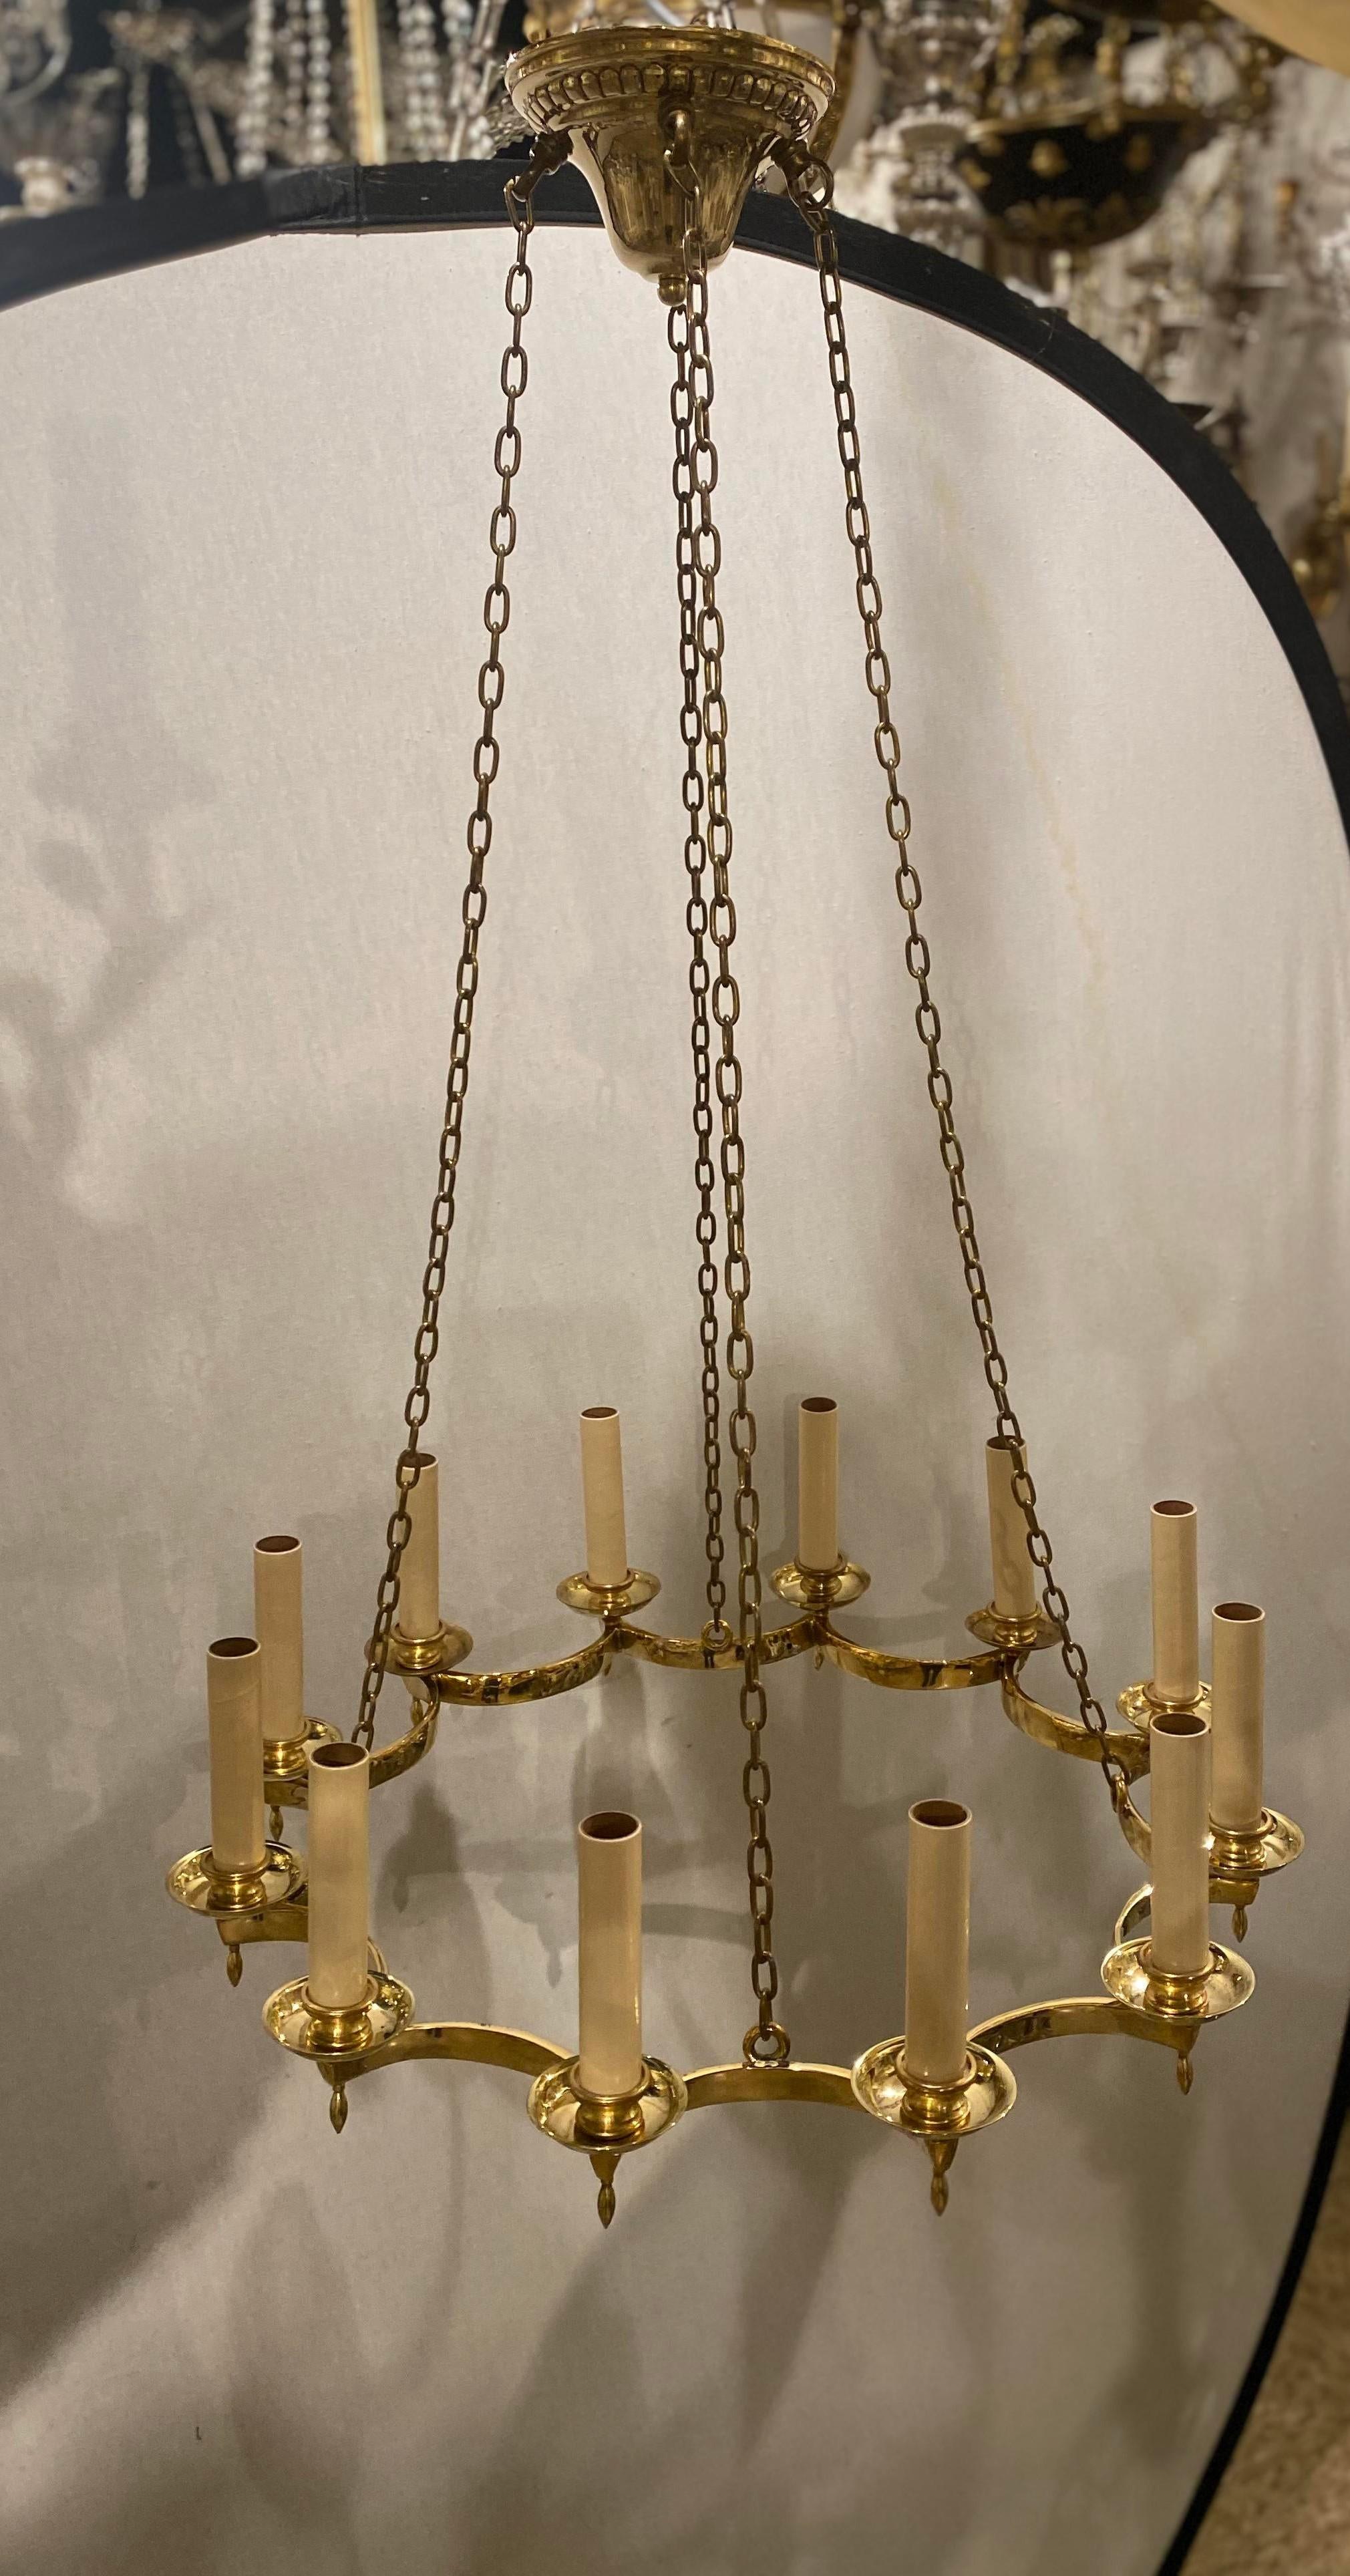 A circa 1940’s French gilt bronze chandelier with 12 lights